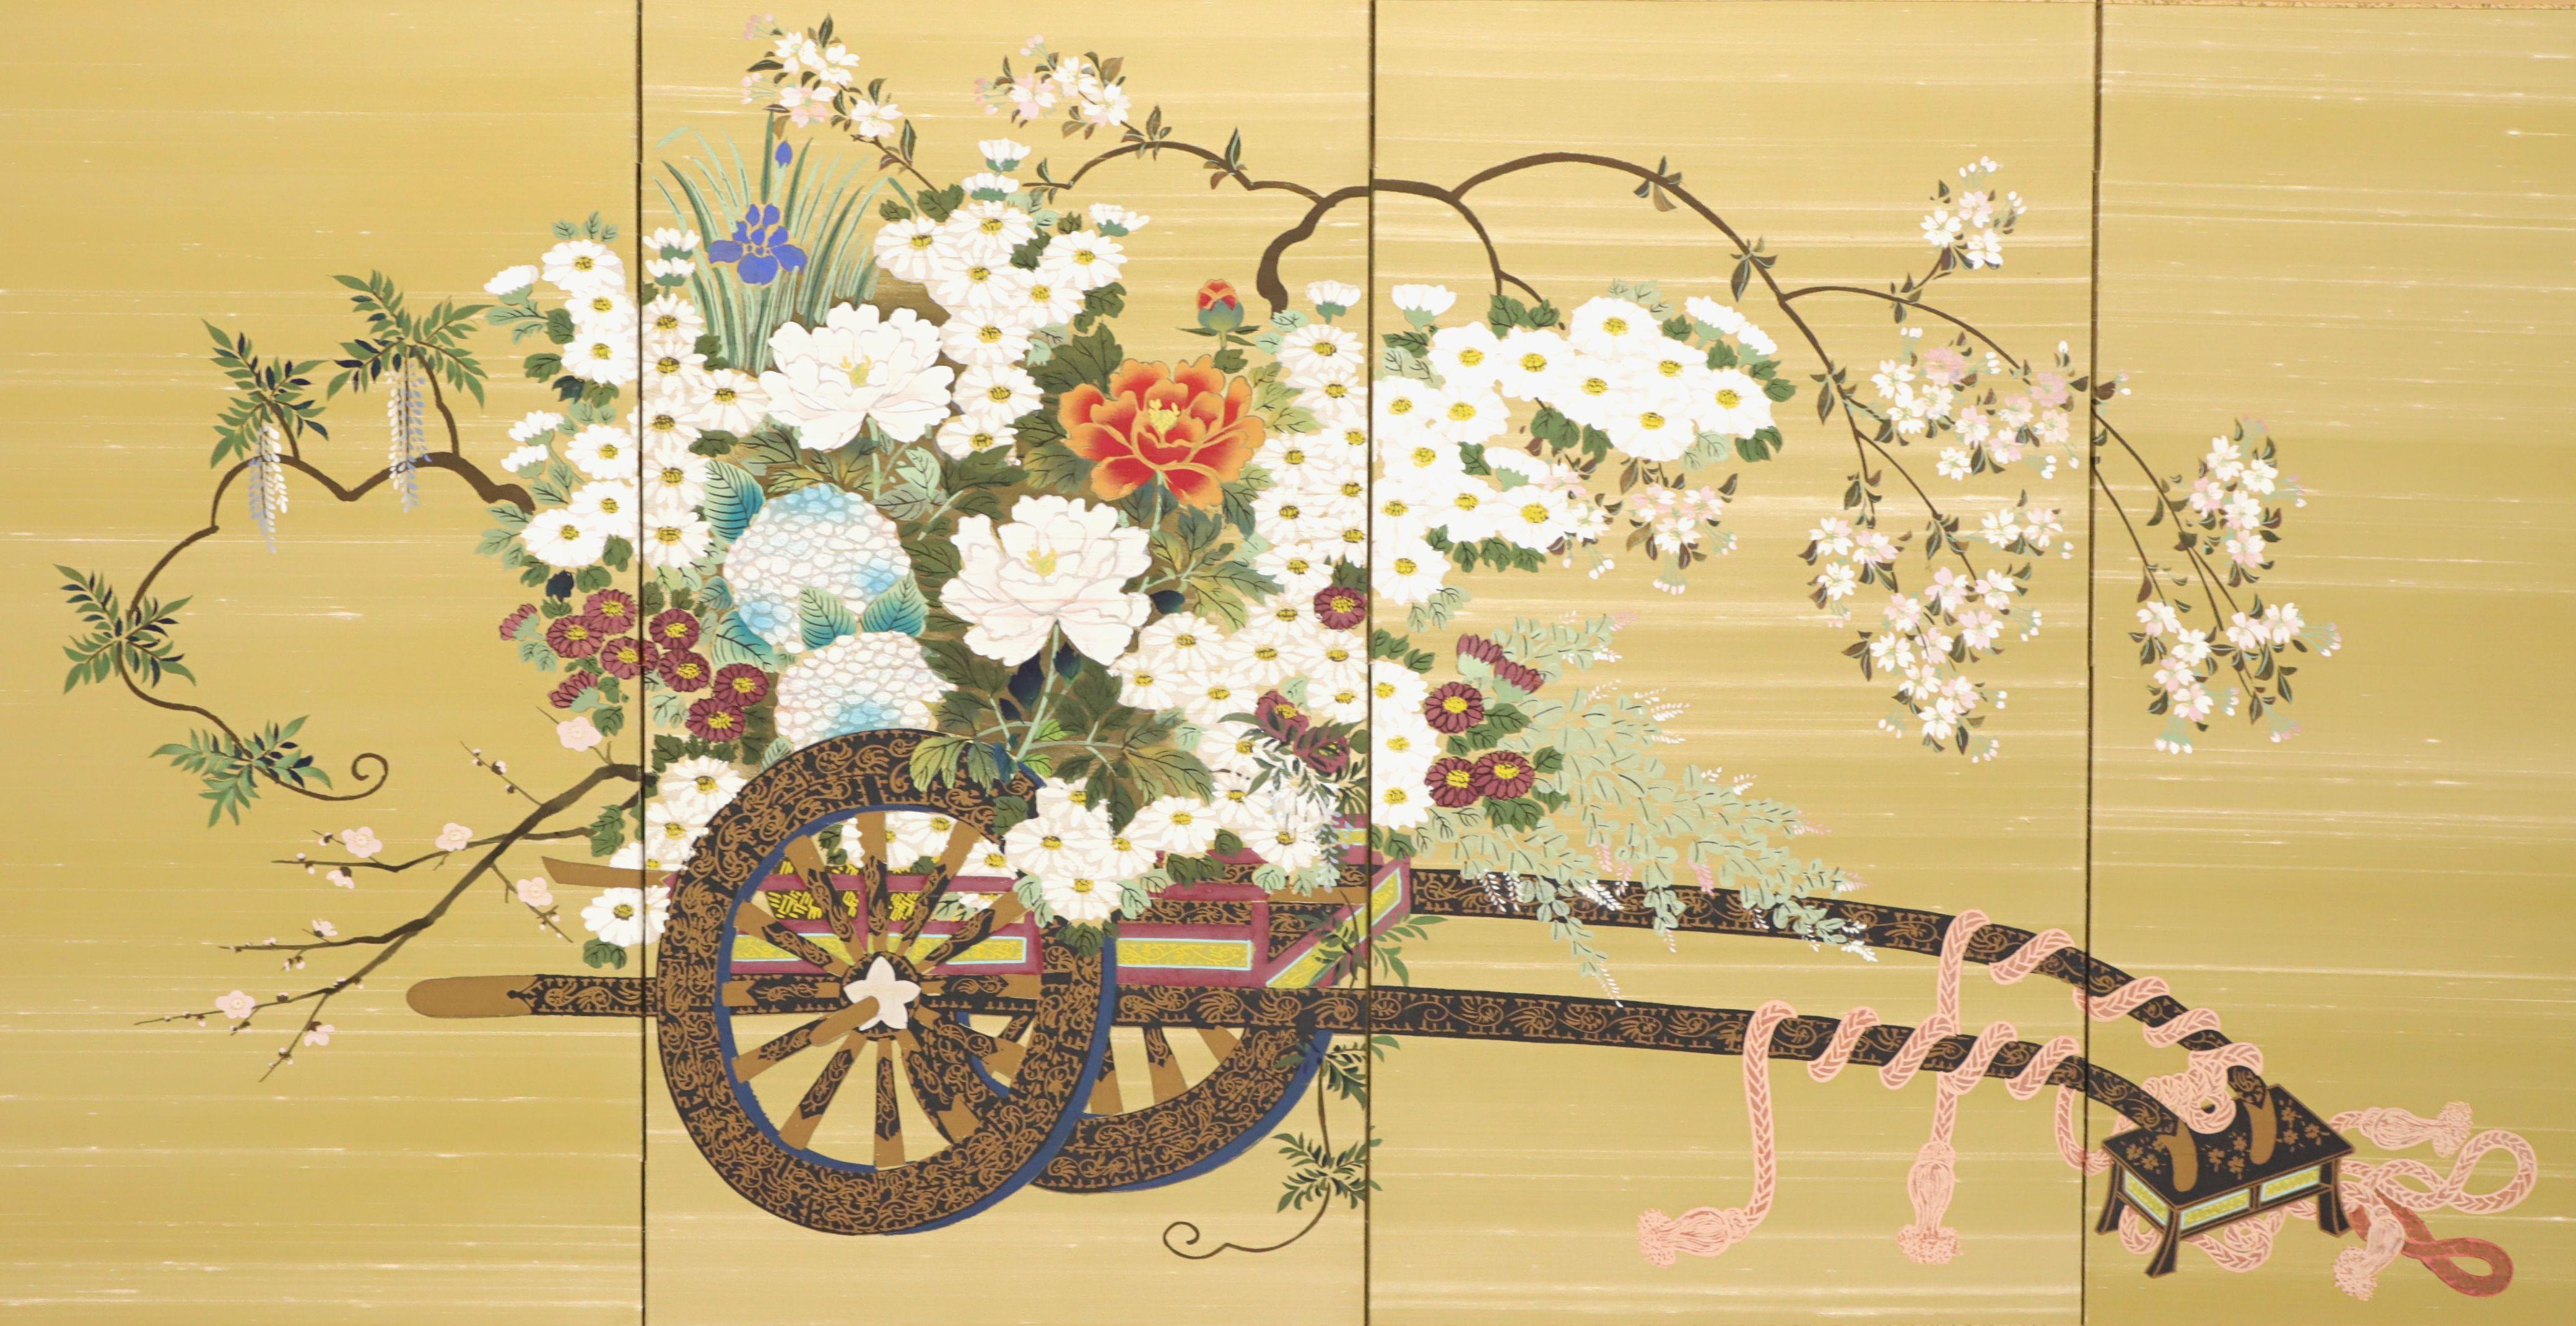 An Asian Japanese four-panel folding screen. Untitled, (Flower Cart). Unsigned, artist unknown. Hand painted on fabric, possibly silk, then applied to four connected framed fabric panels that creates one scene. Fabric panels are framed in black